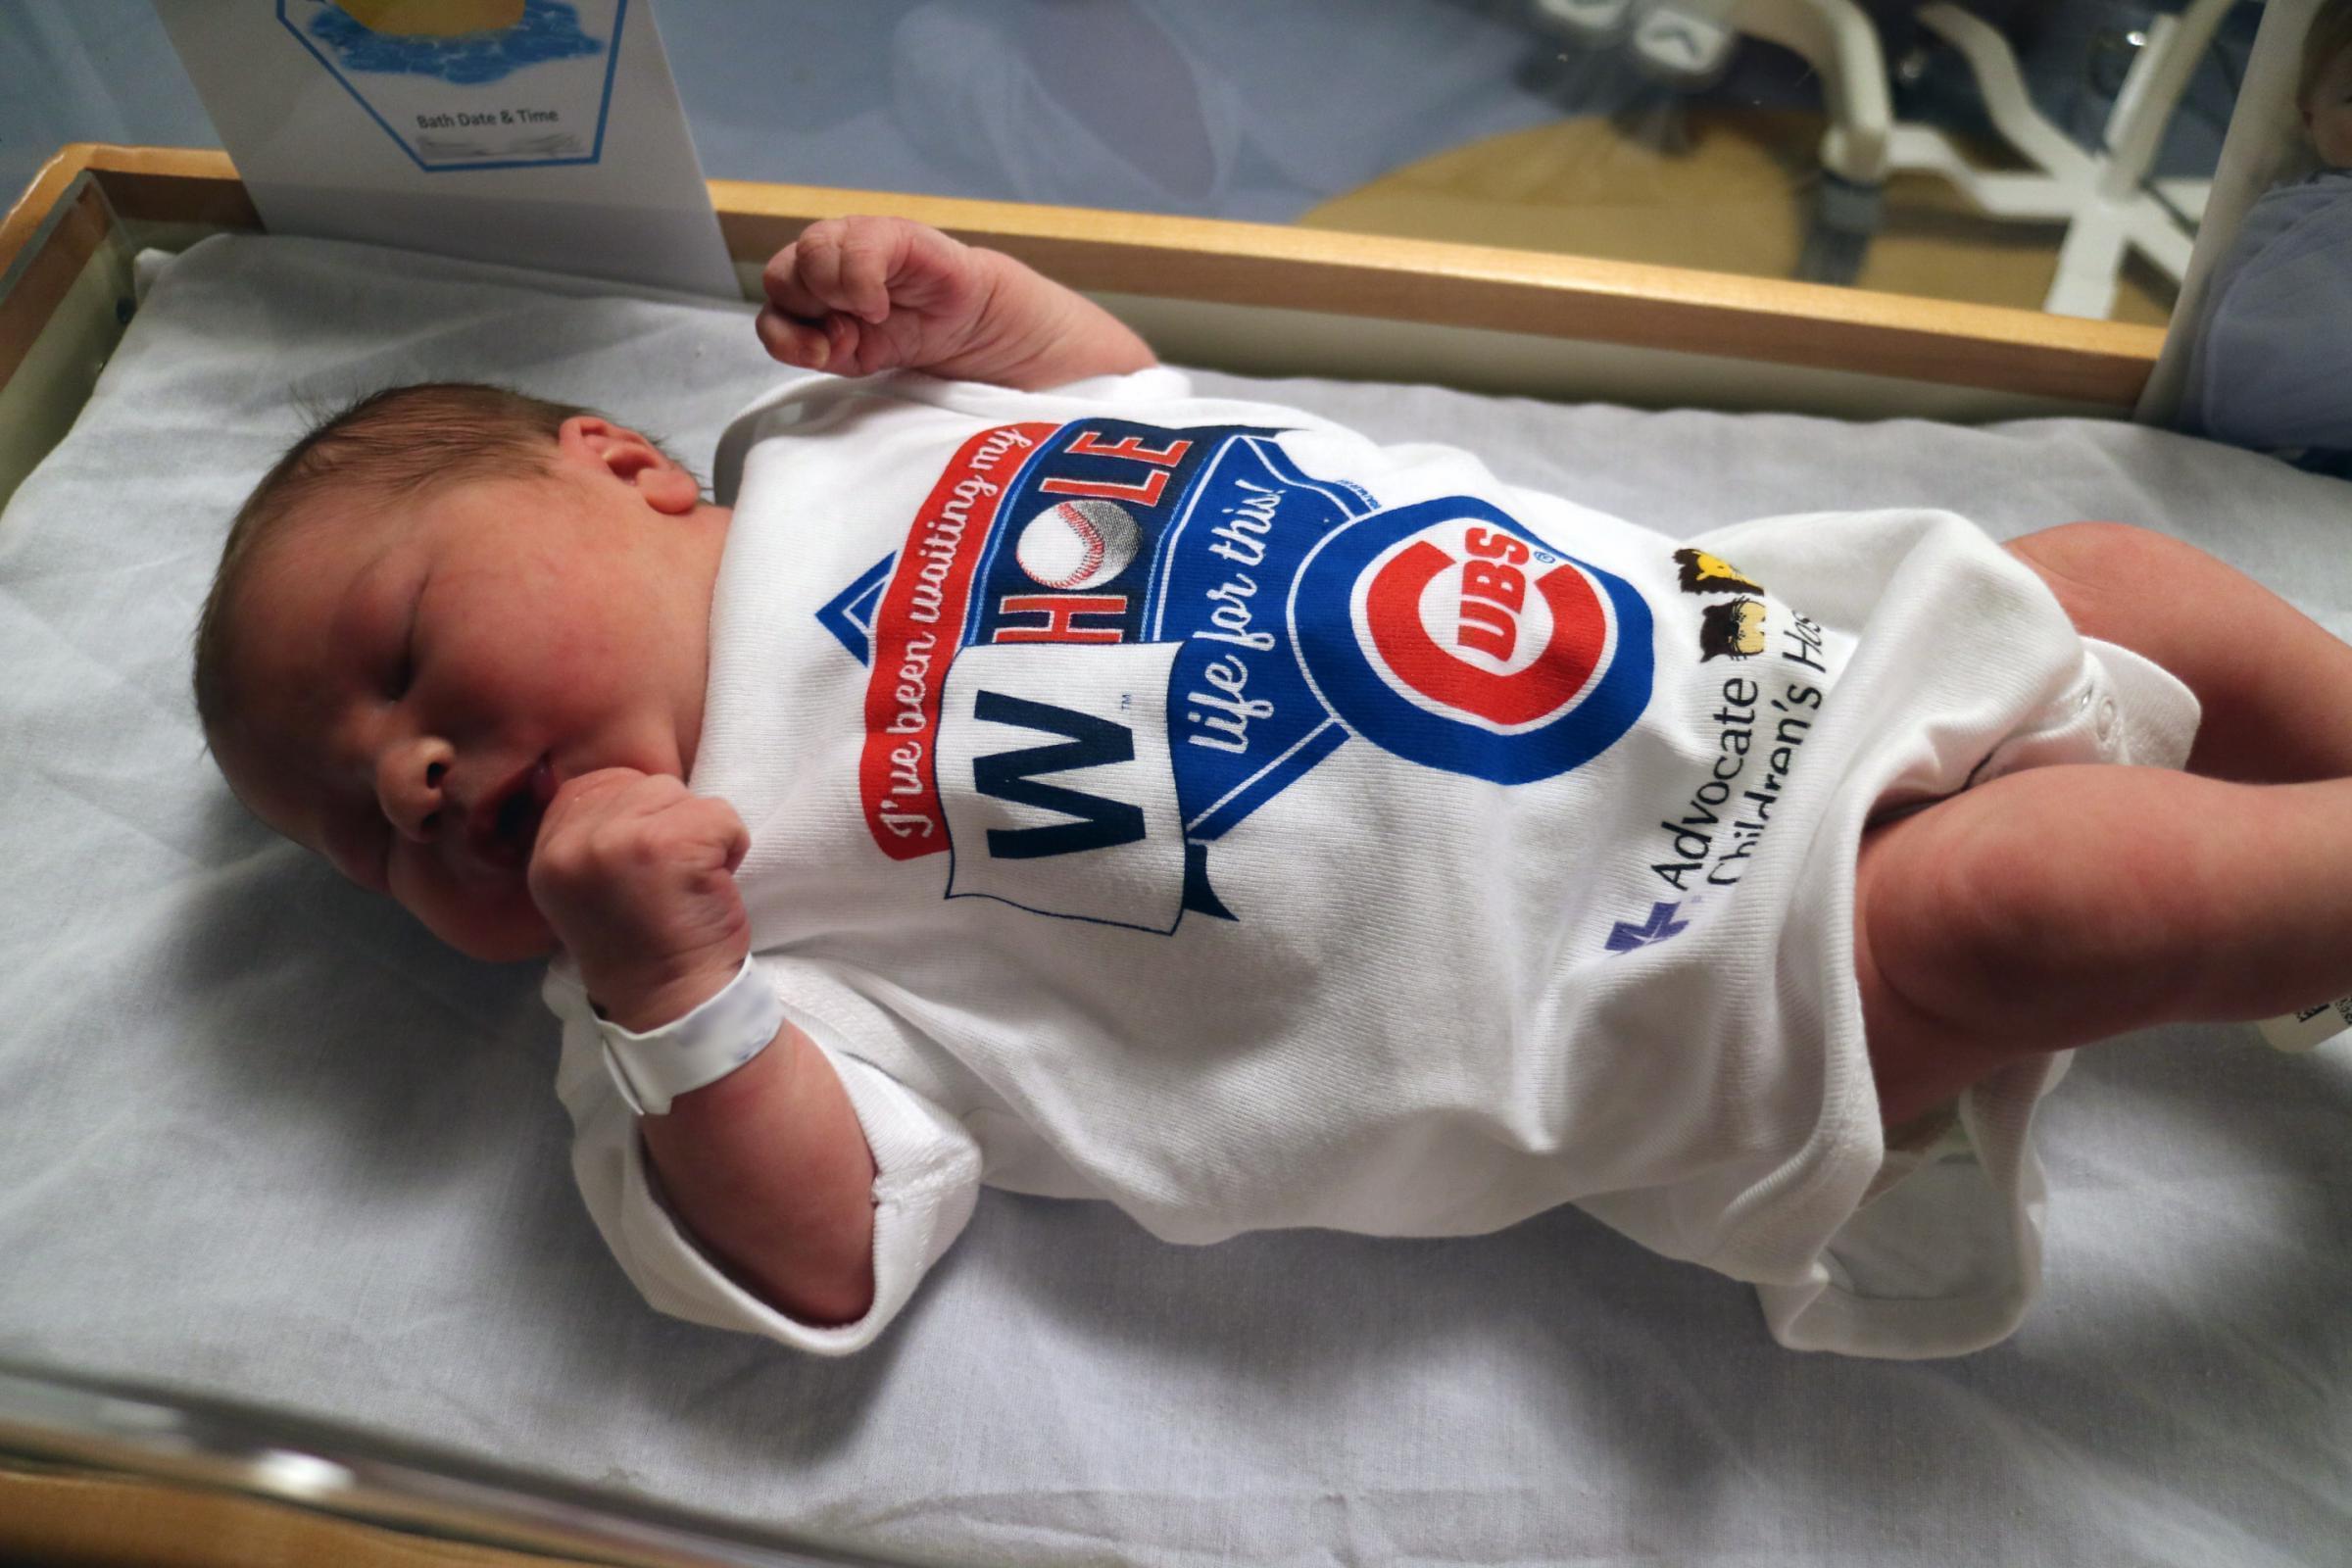 Last fall Advocate BroMenn gave away special onesies for the Cubs World Series win.